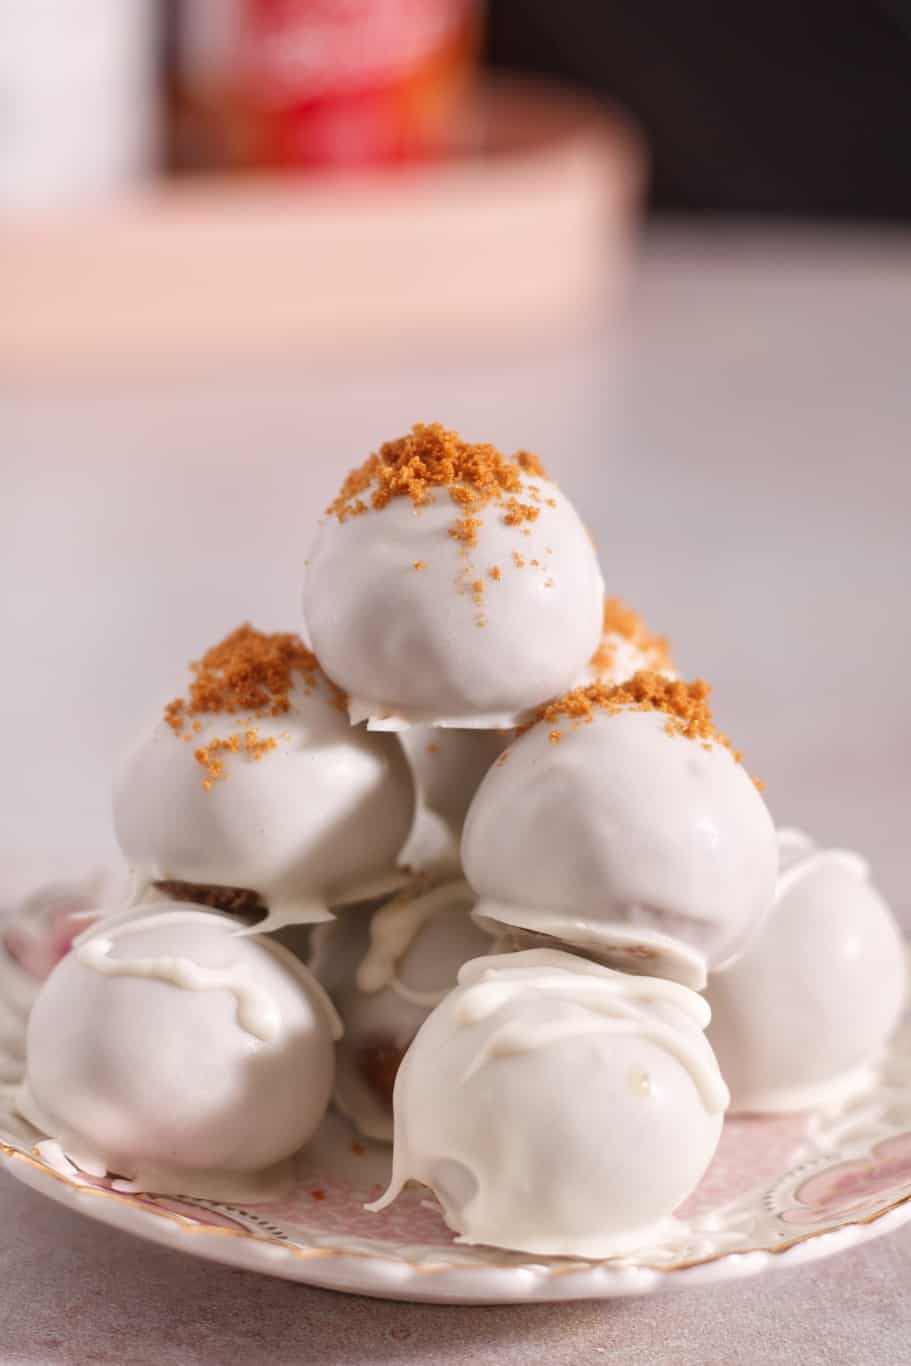 no bake biscoff truffles packed with warm Speculoos cookie flavor, covered with white chocolate, and sprinkled with biscoff crumbs